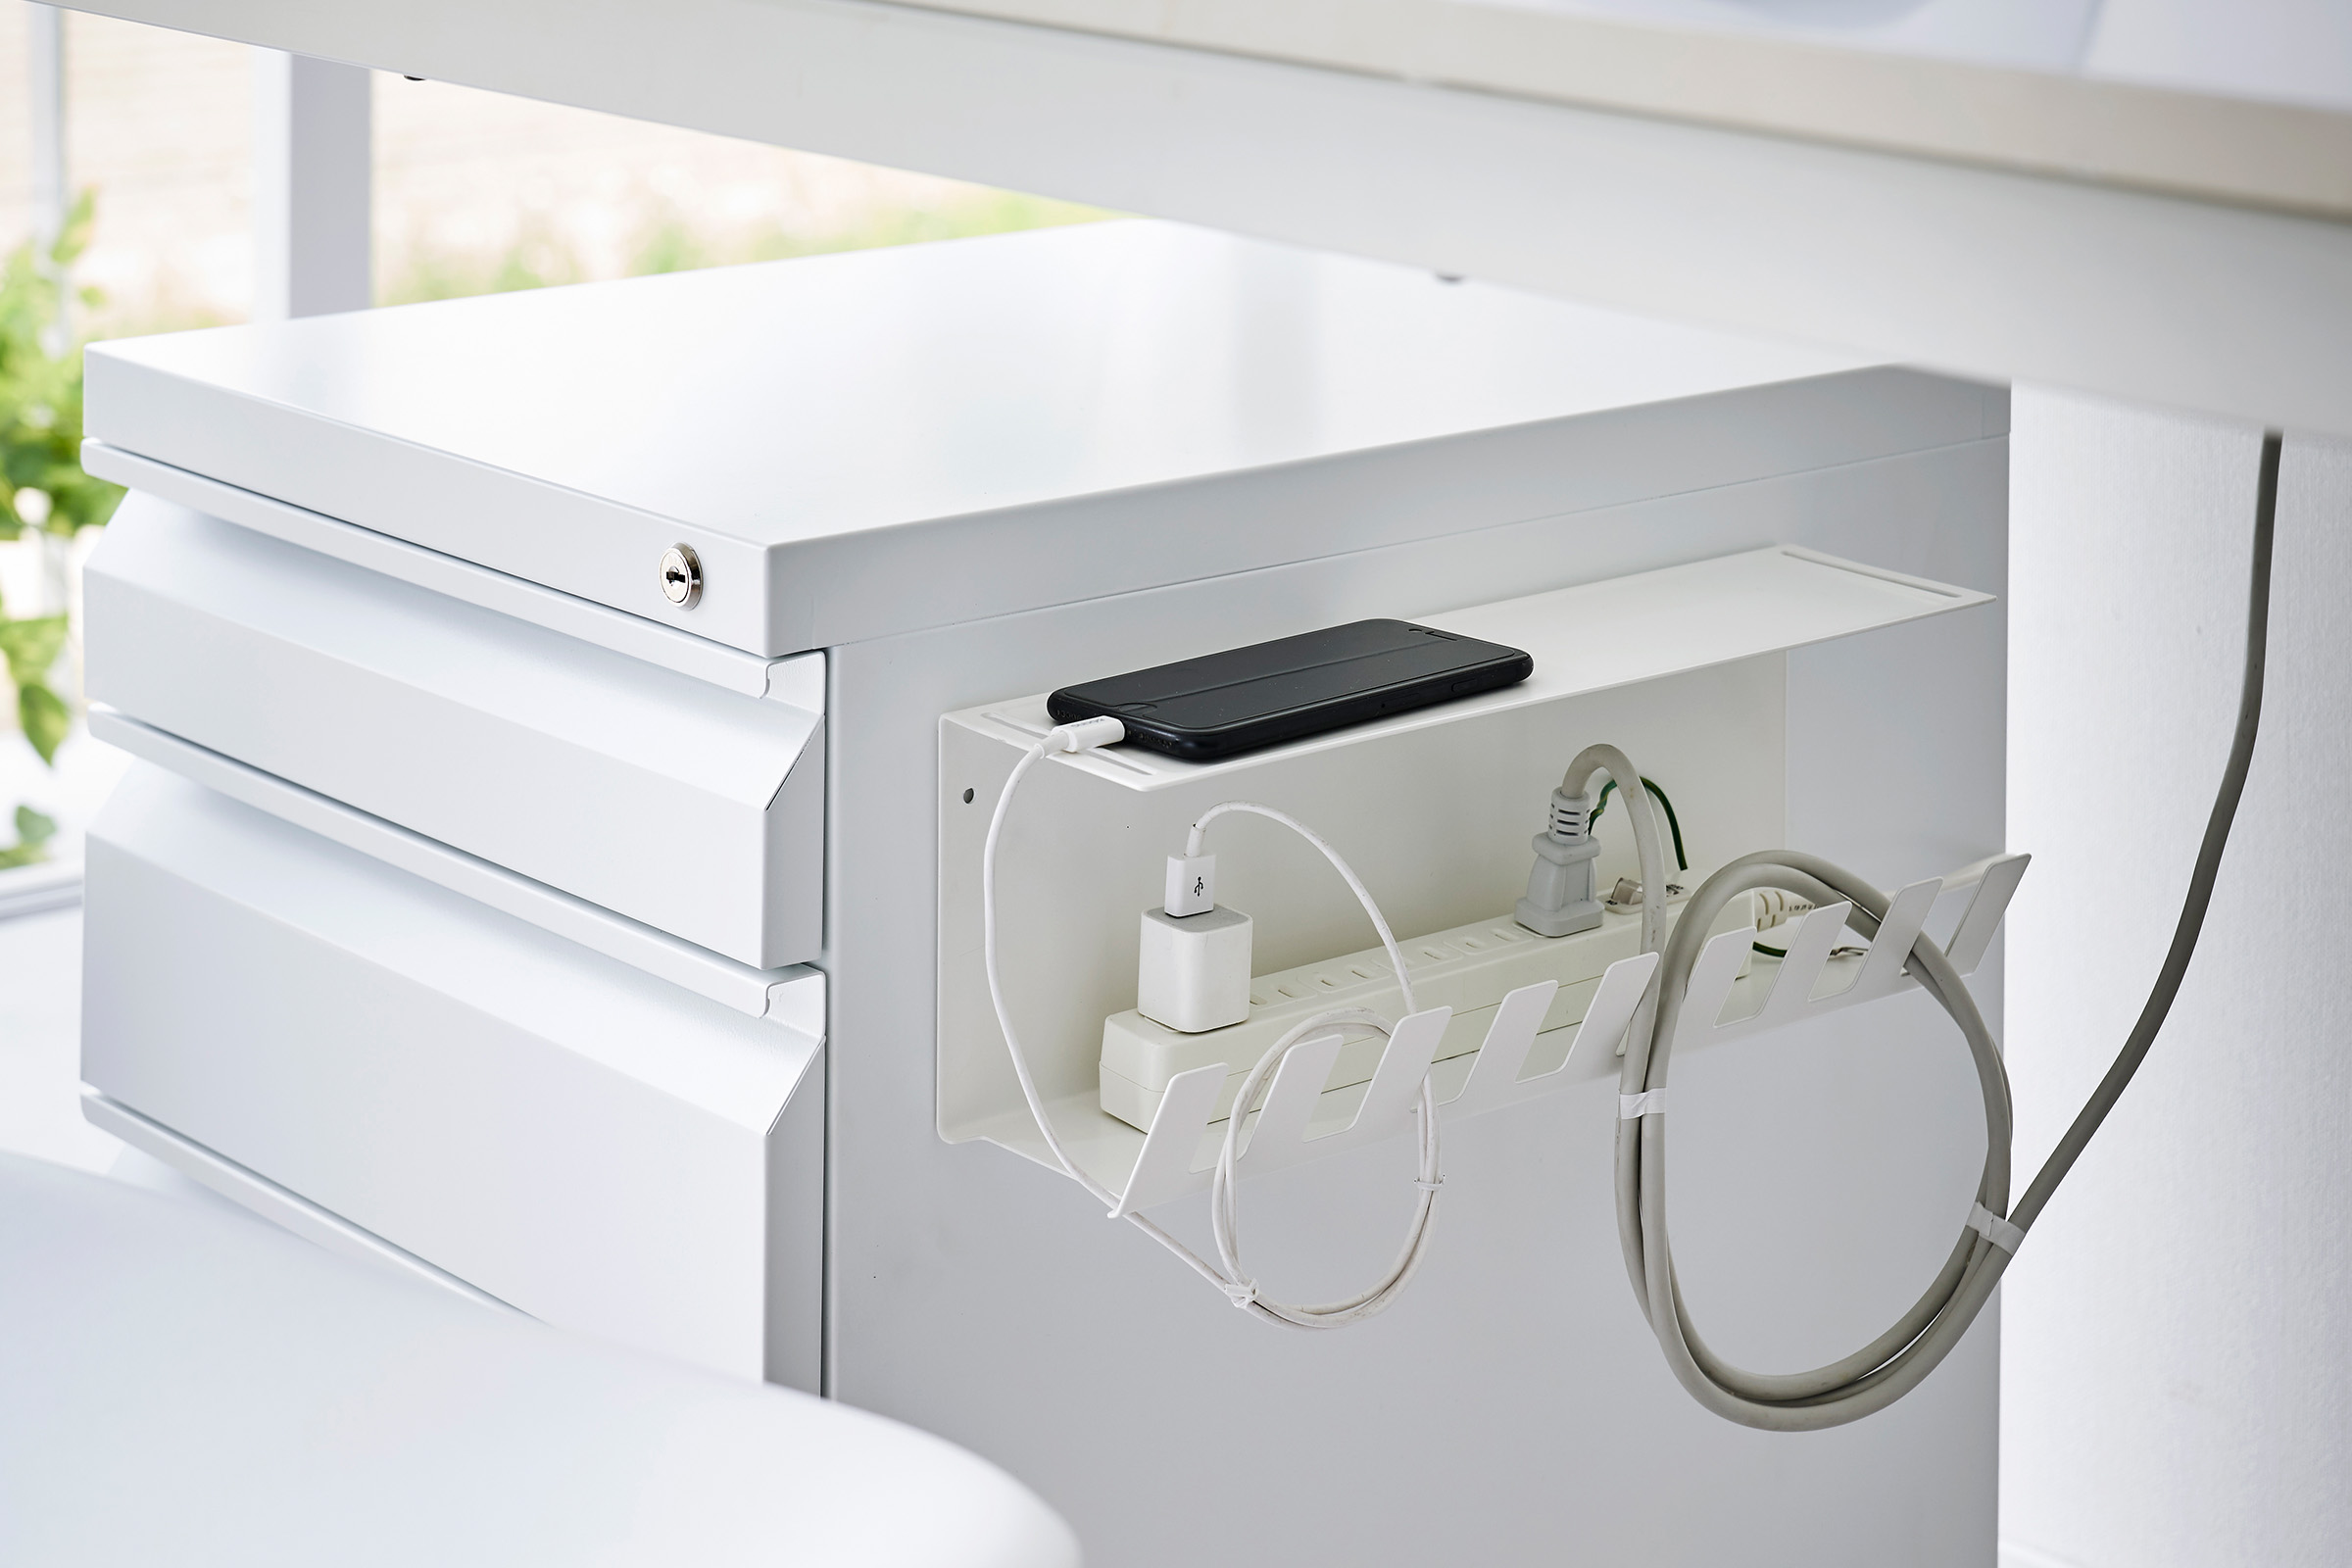 Magnetic Under-Desk Cable Organizer in white by Yamazaki Home mounted on the side of a file cabinet holding a power strip and phone.